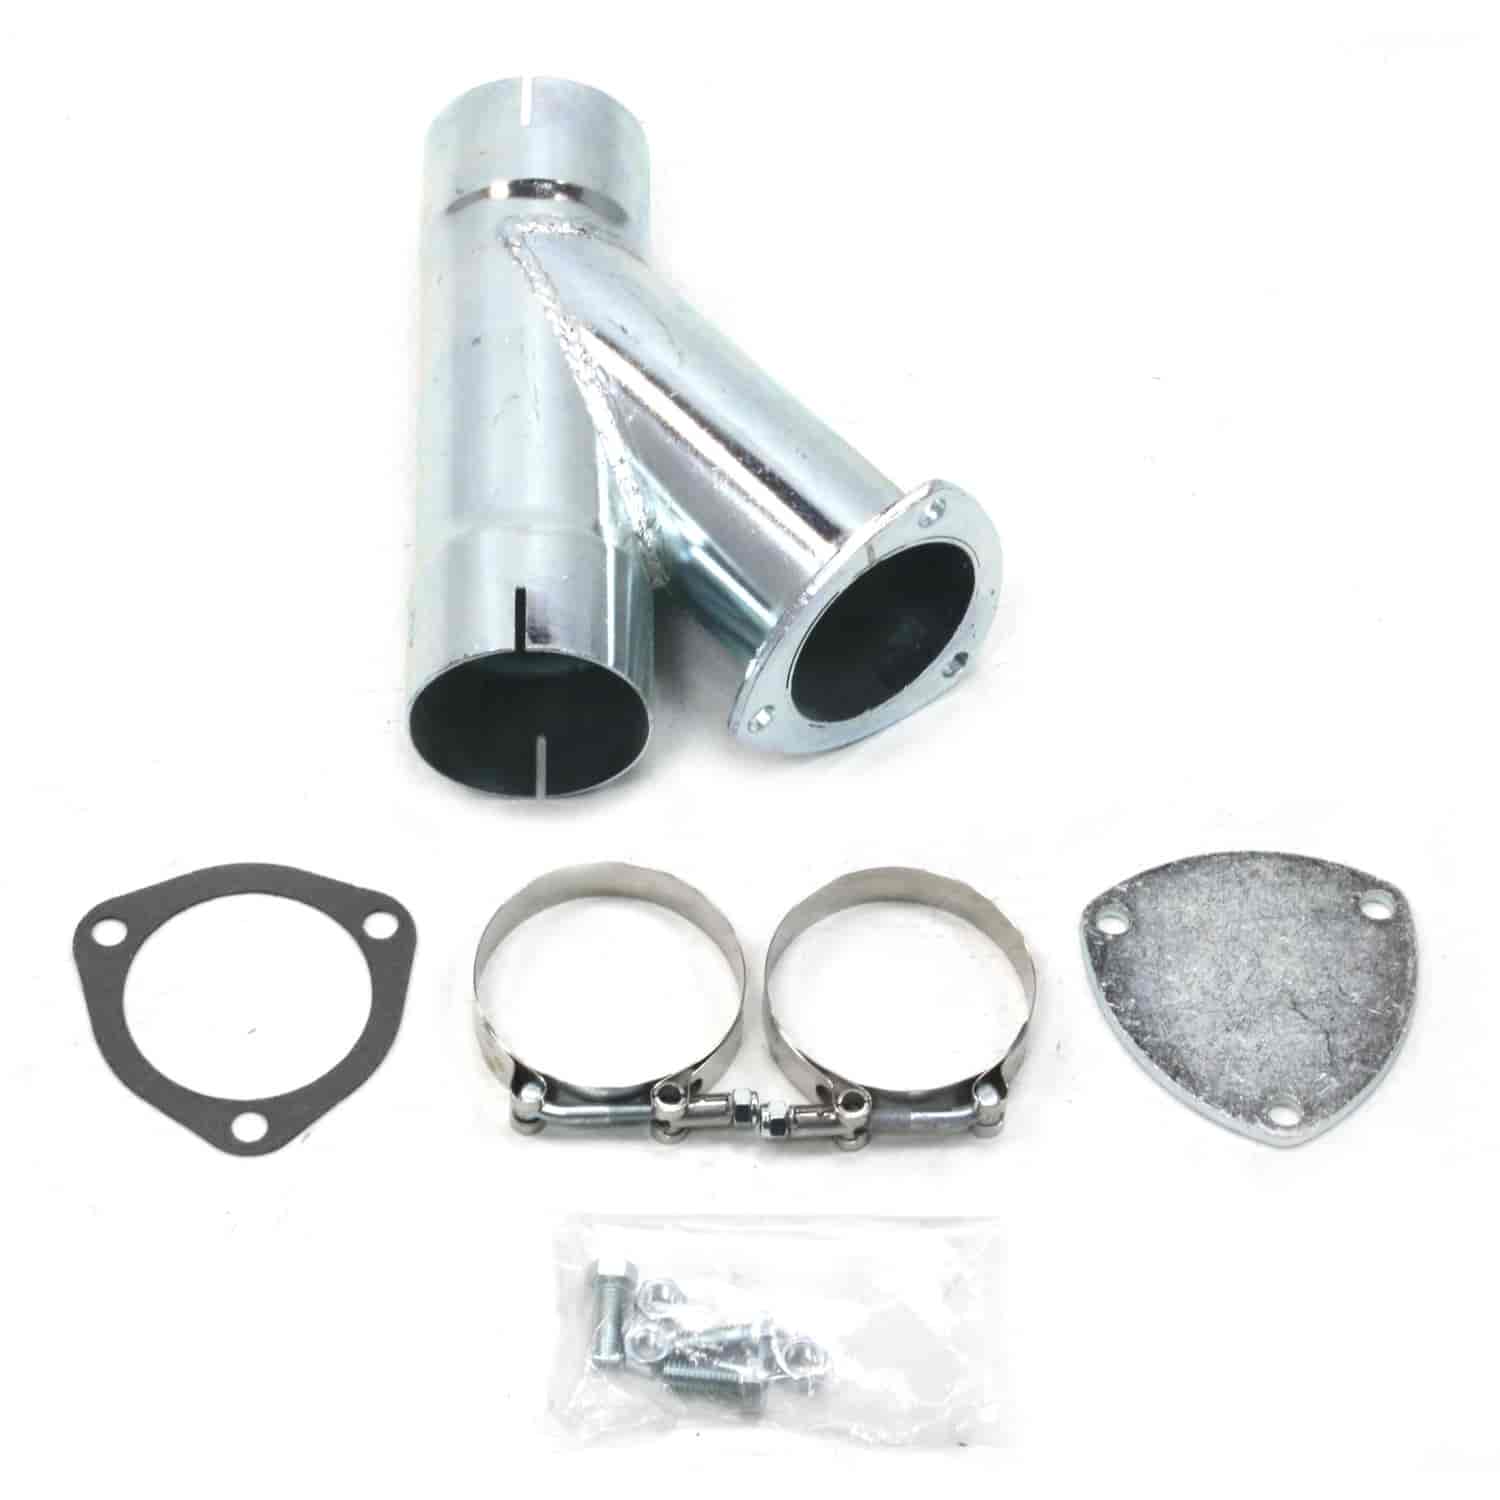 Exhaust Cut-Out Kit Tube Diameter: 3"